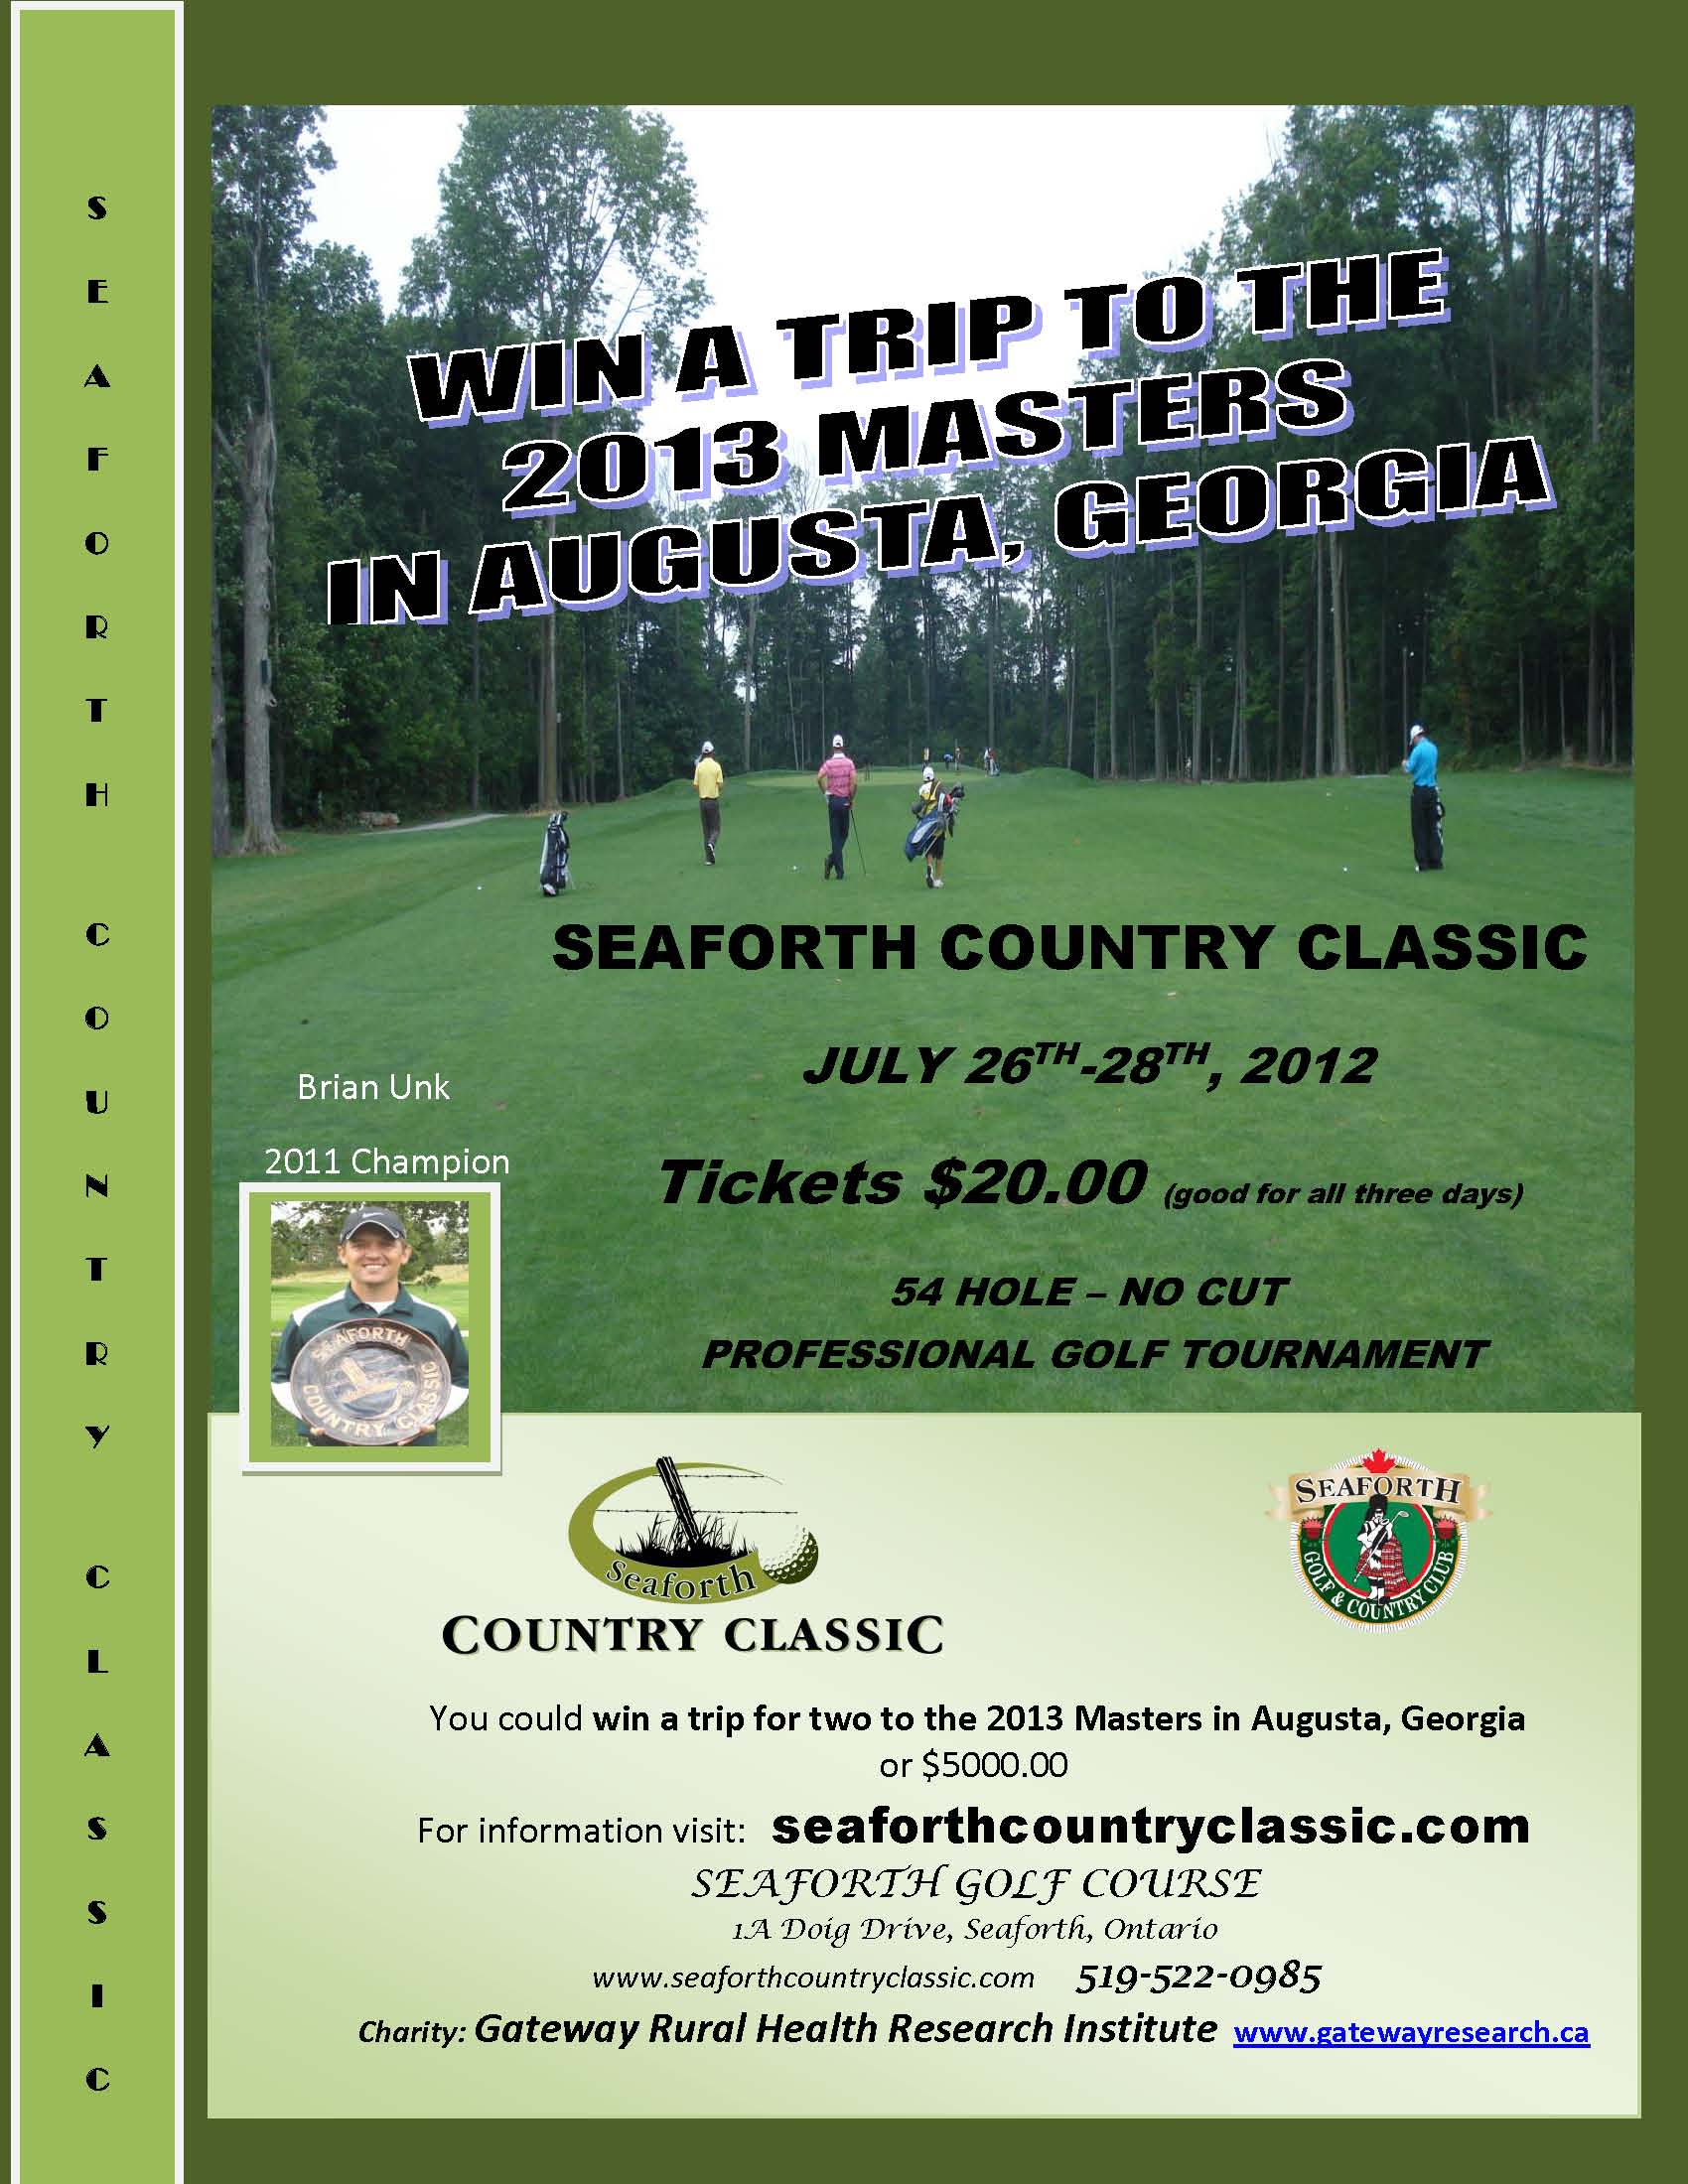 33879-seaforth_country_classic_open_2012.jpg